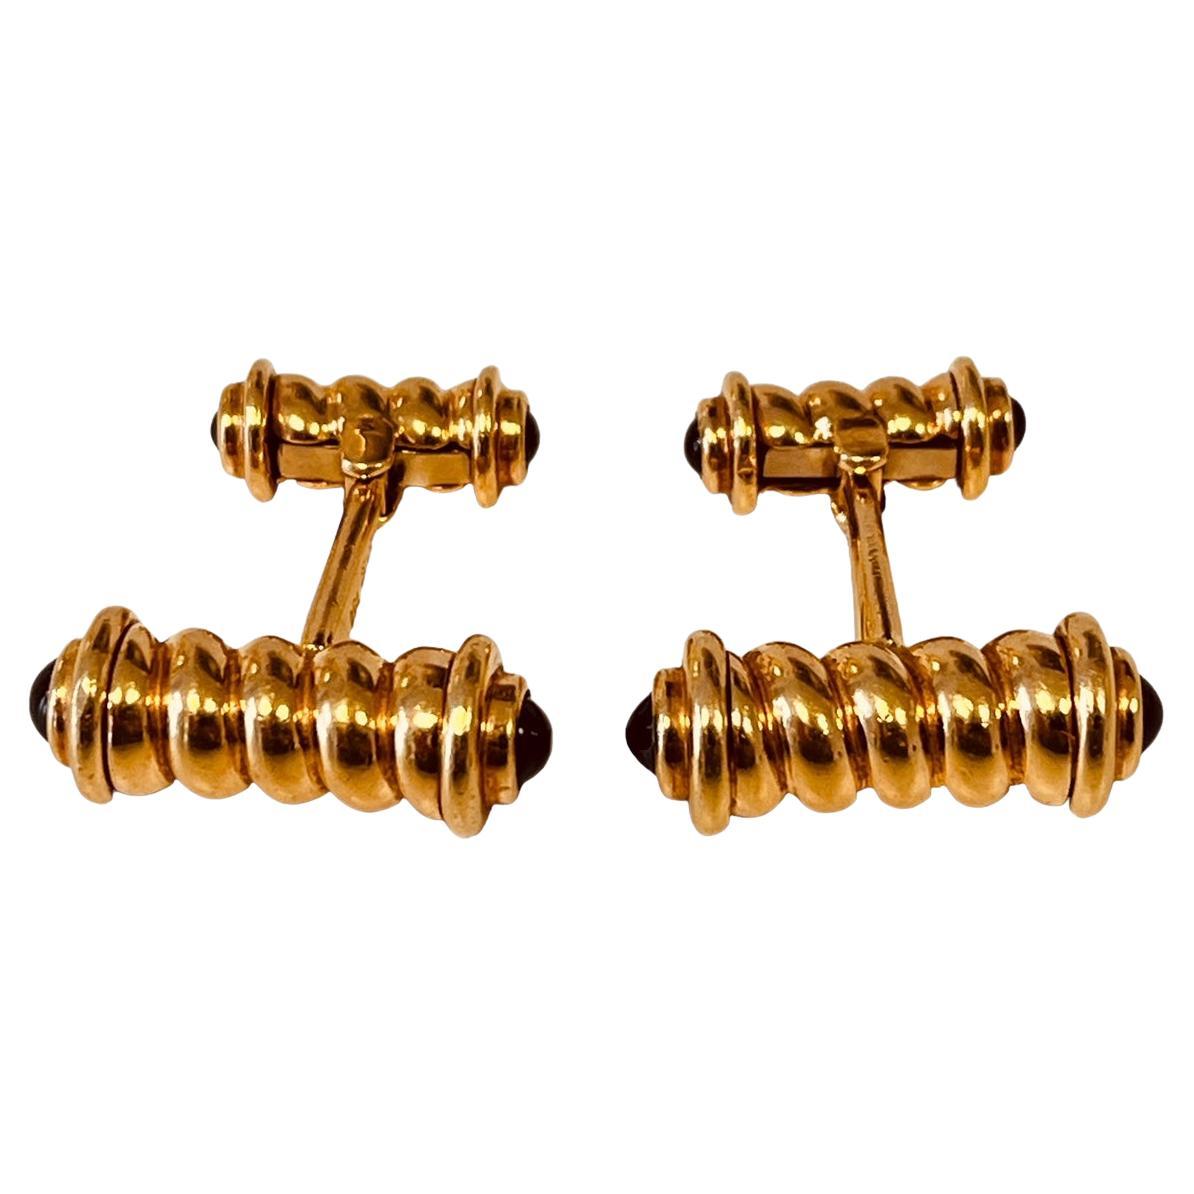 A Pair of 18ct Yellow Gold and Cabochon Sapphire Cufflinks. Circa 1990's